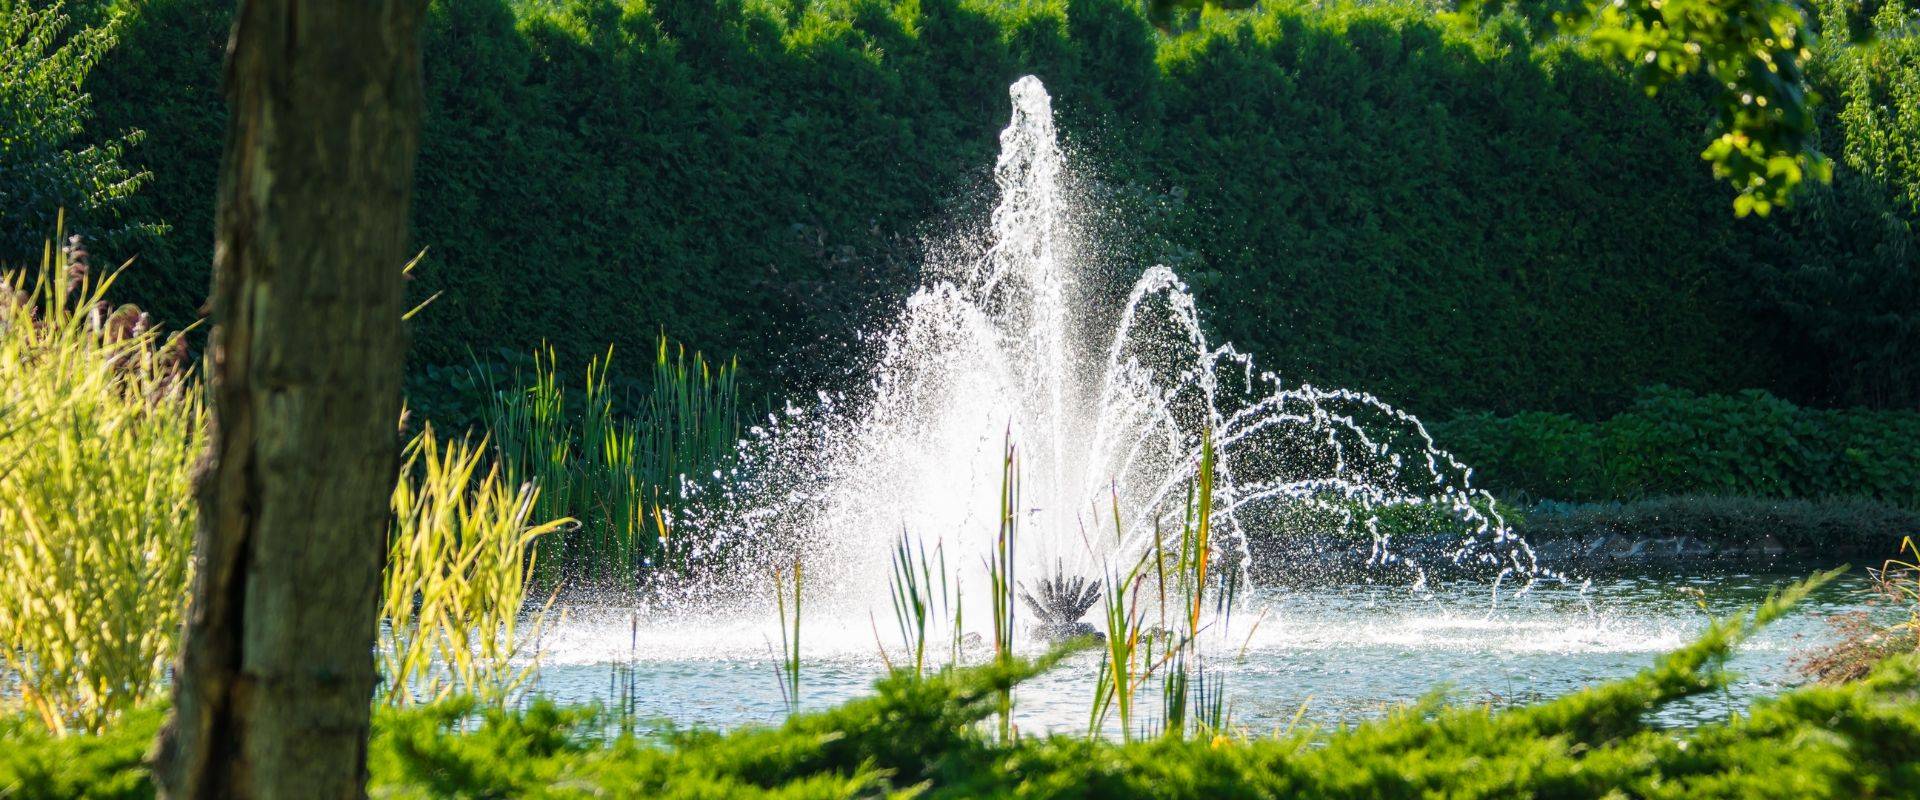 seven considerations in choosing a pond fountain